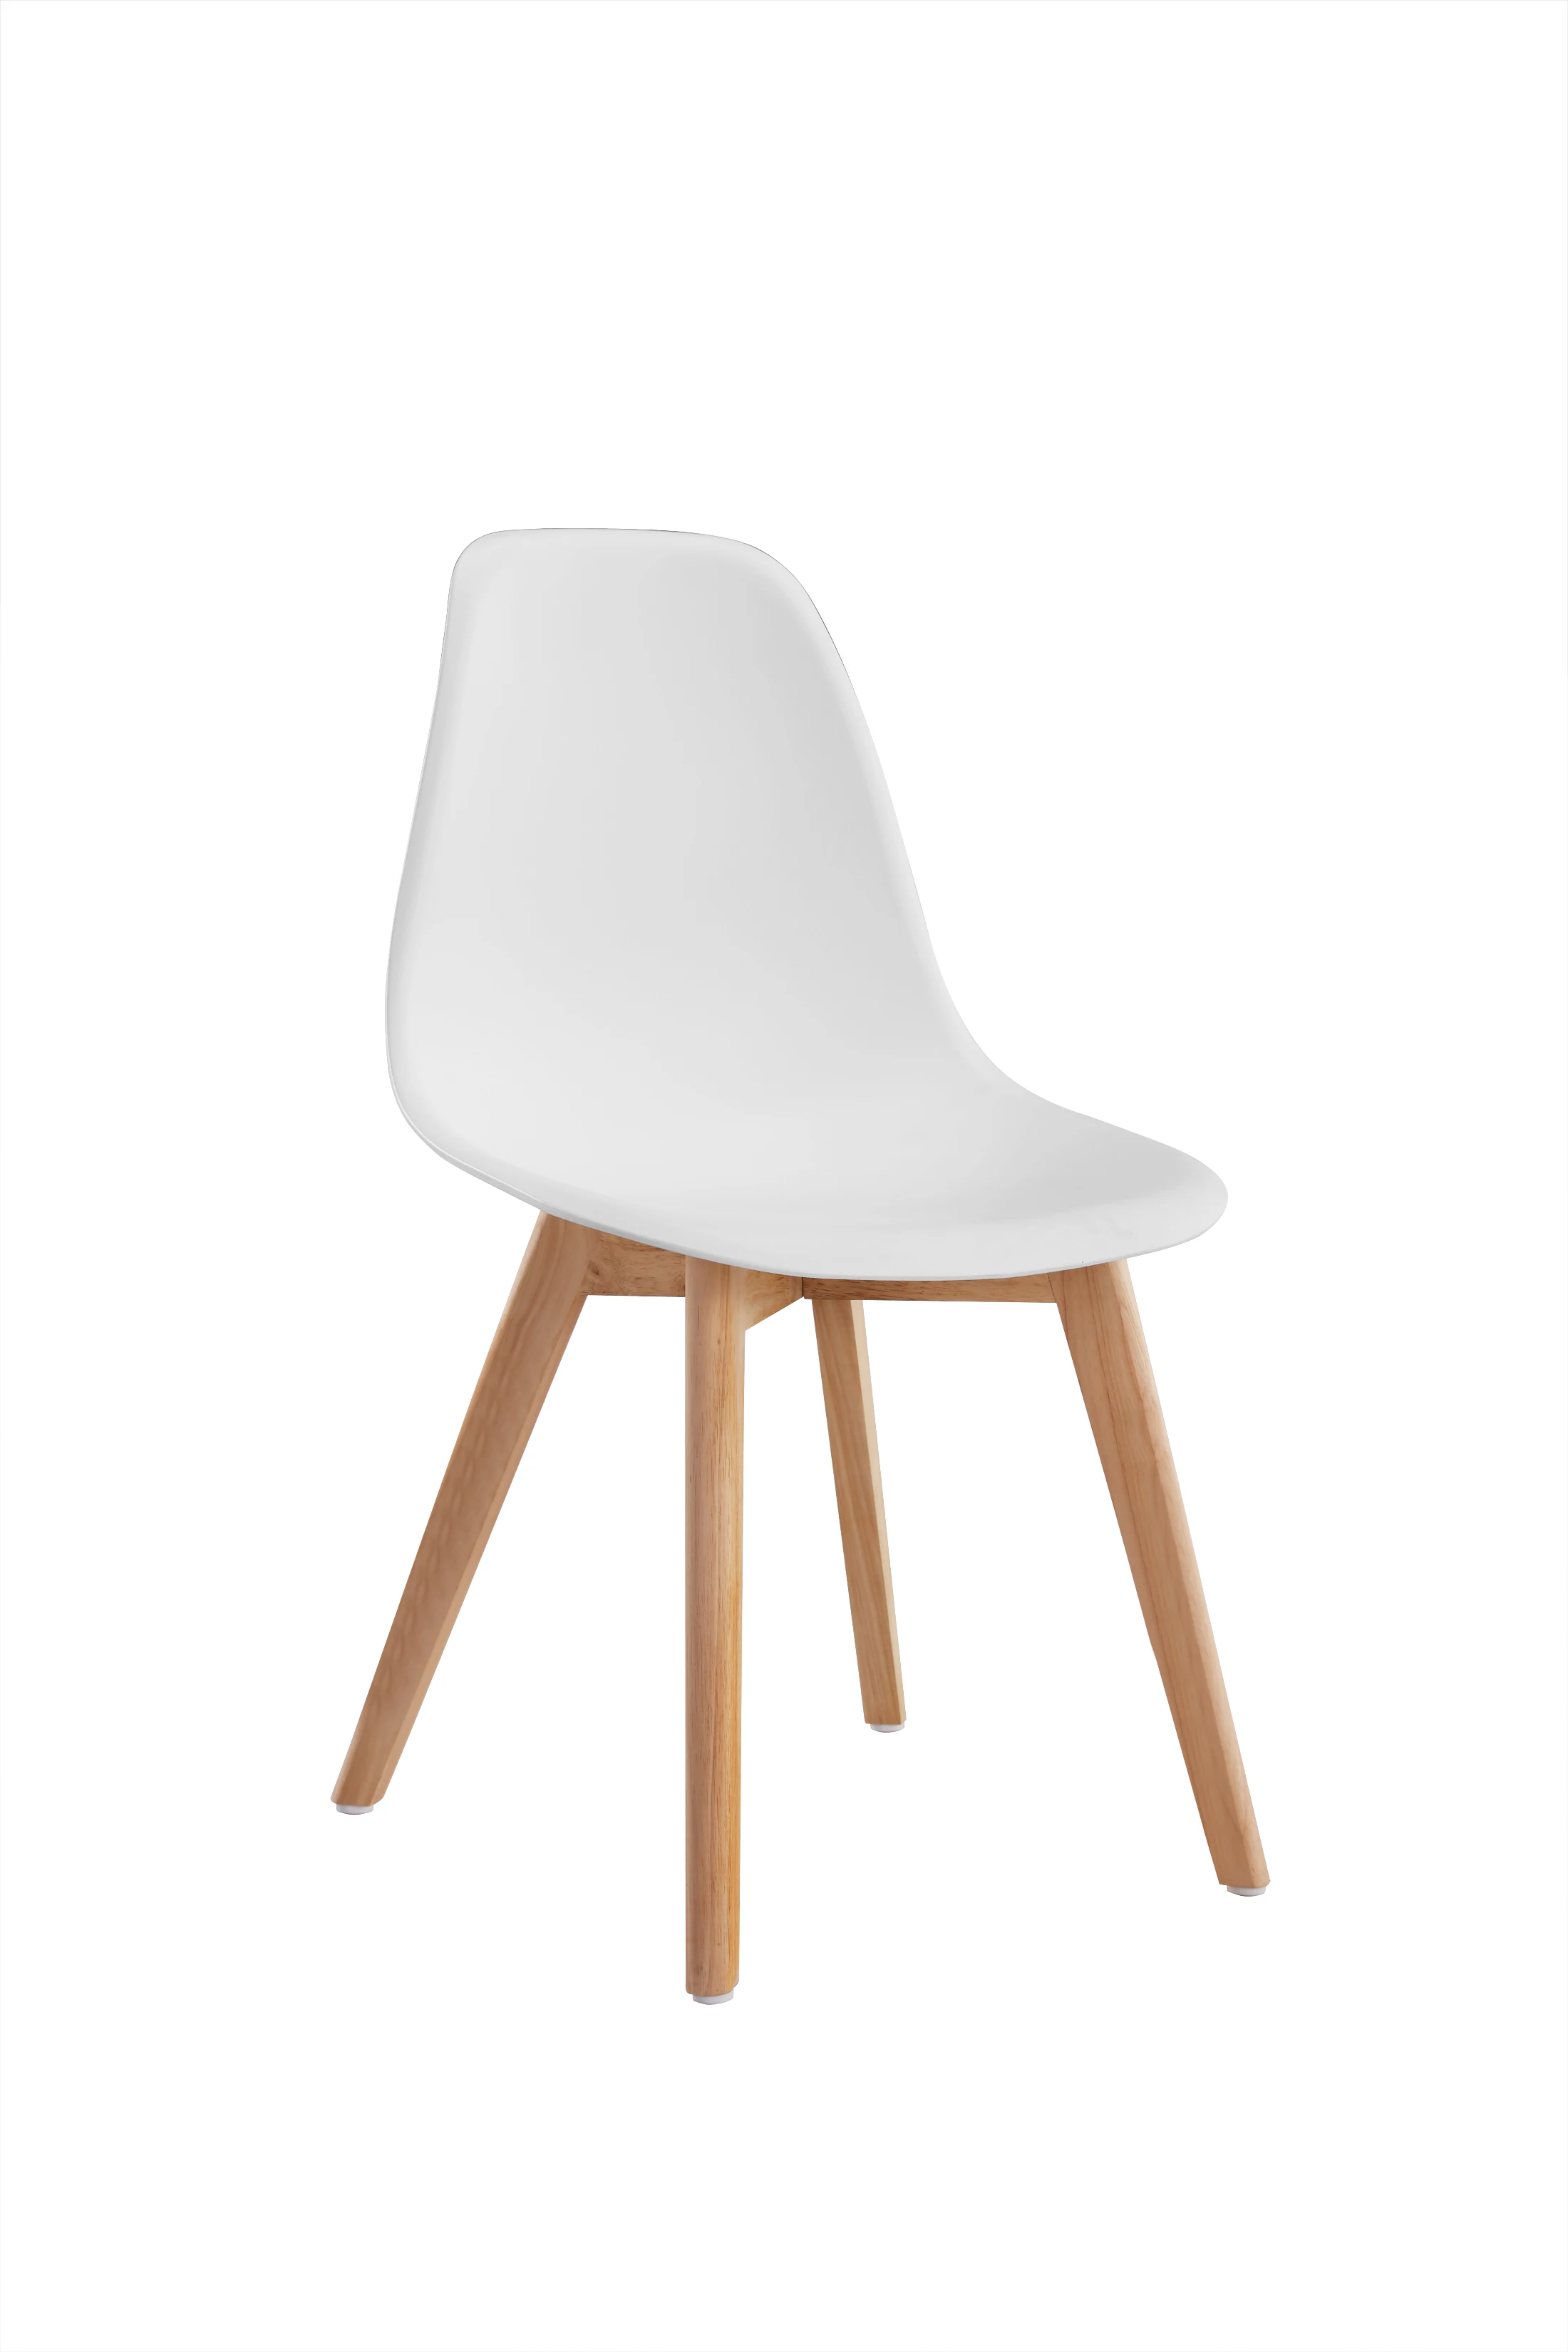 Cheap Modern White Polypropylene Wooden Legs Kitchen Chairs Plastic Dining Chairs Price Buy Cheap Plastic Chair Price